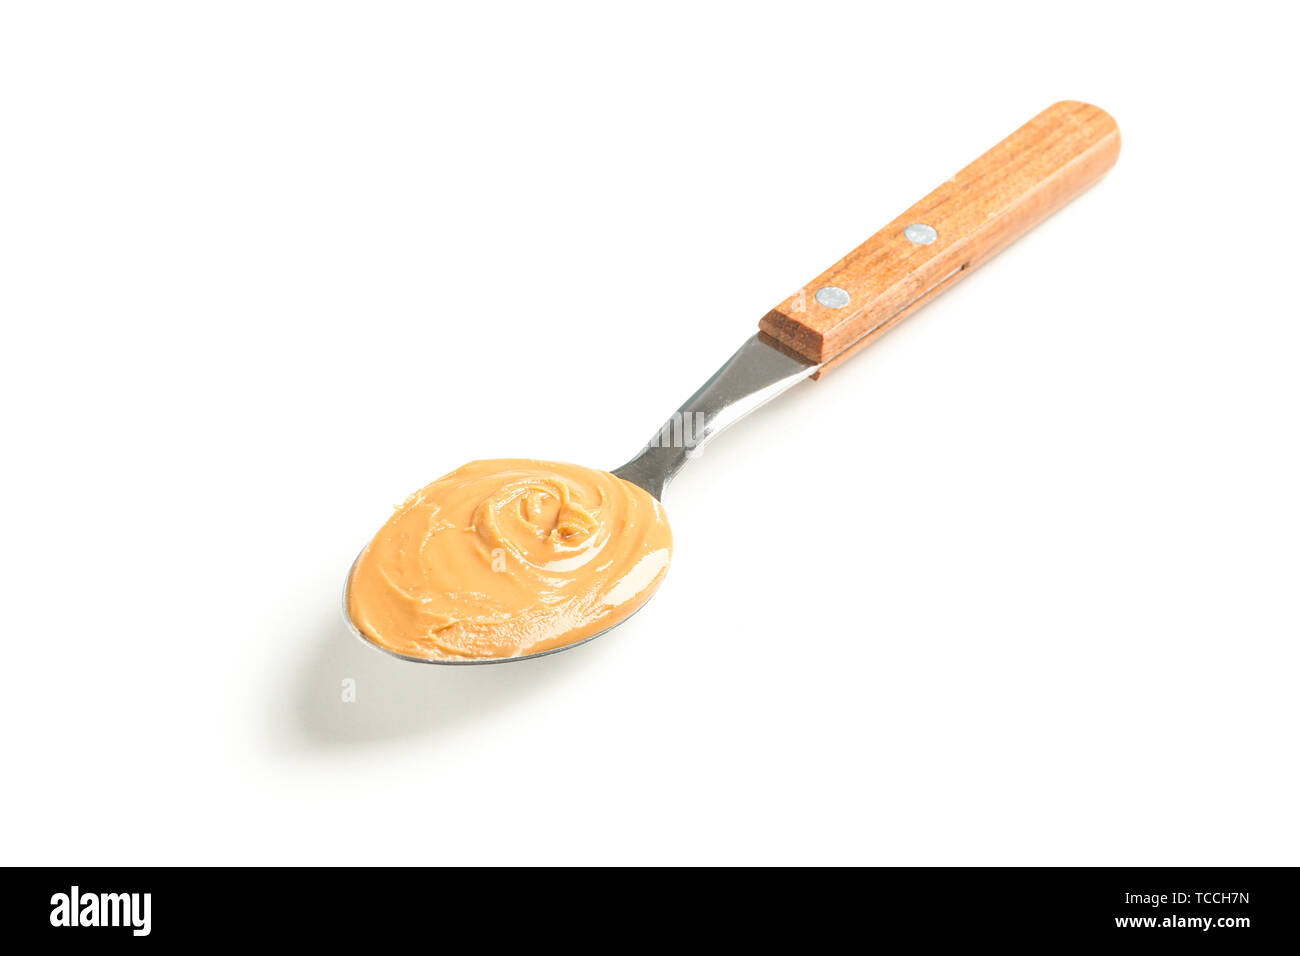 https://c8.alamy.com/comp/TCCH7N/creamy-peanut-butter-in-spoon-isolated-on-white-background-a-traditional-product-of-american-cuisine-TCCH7N.jpg